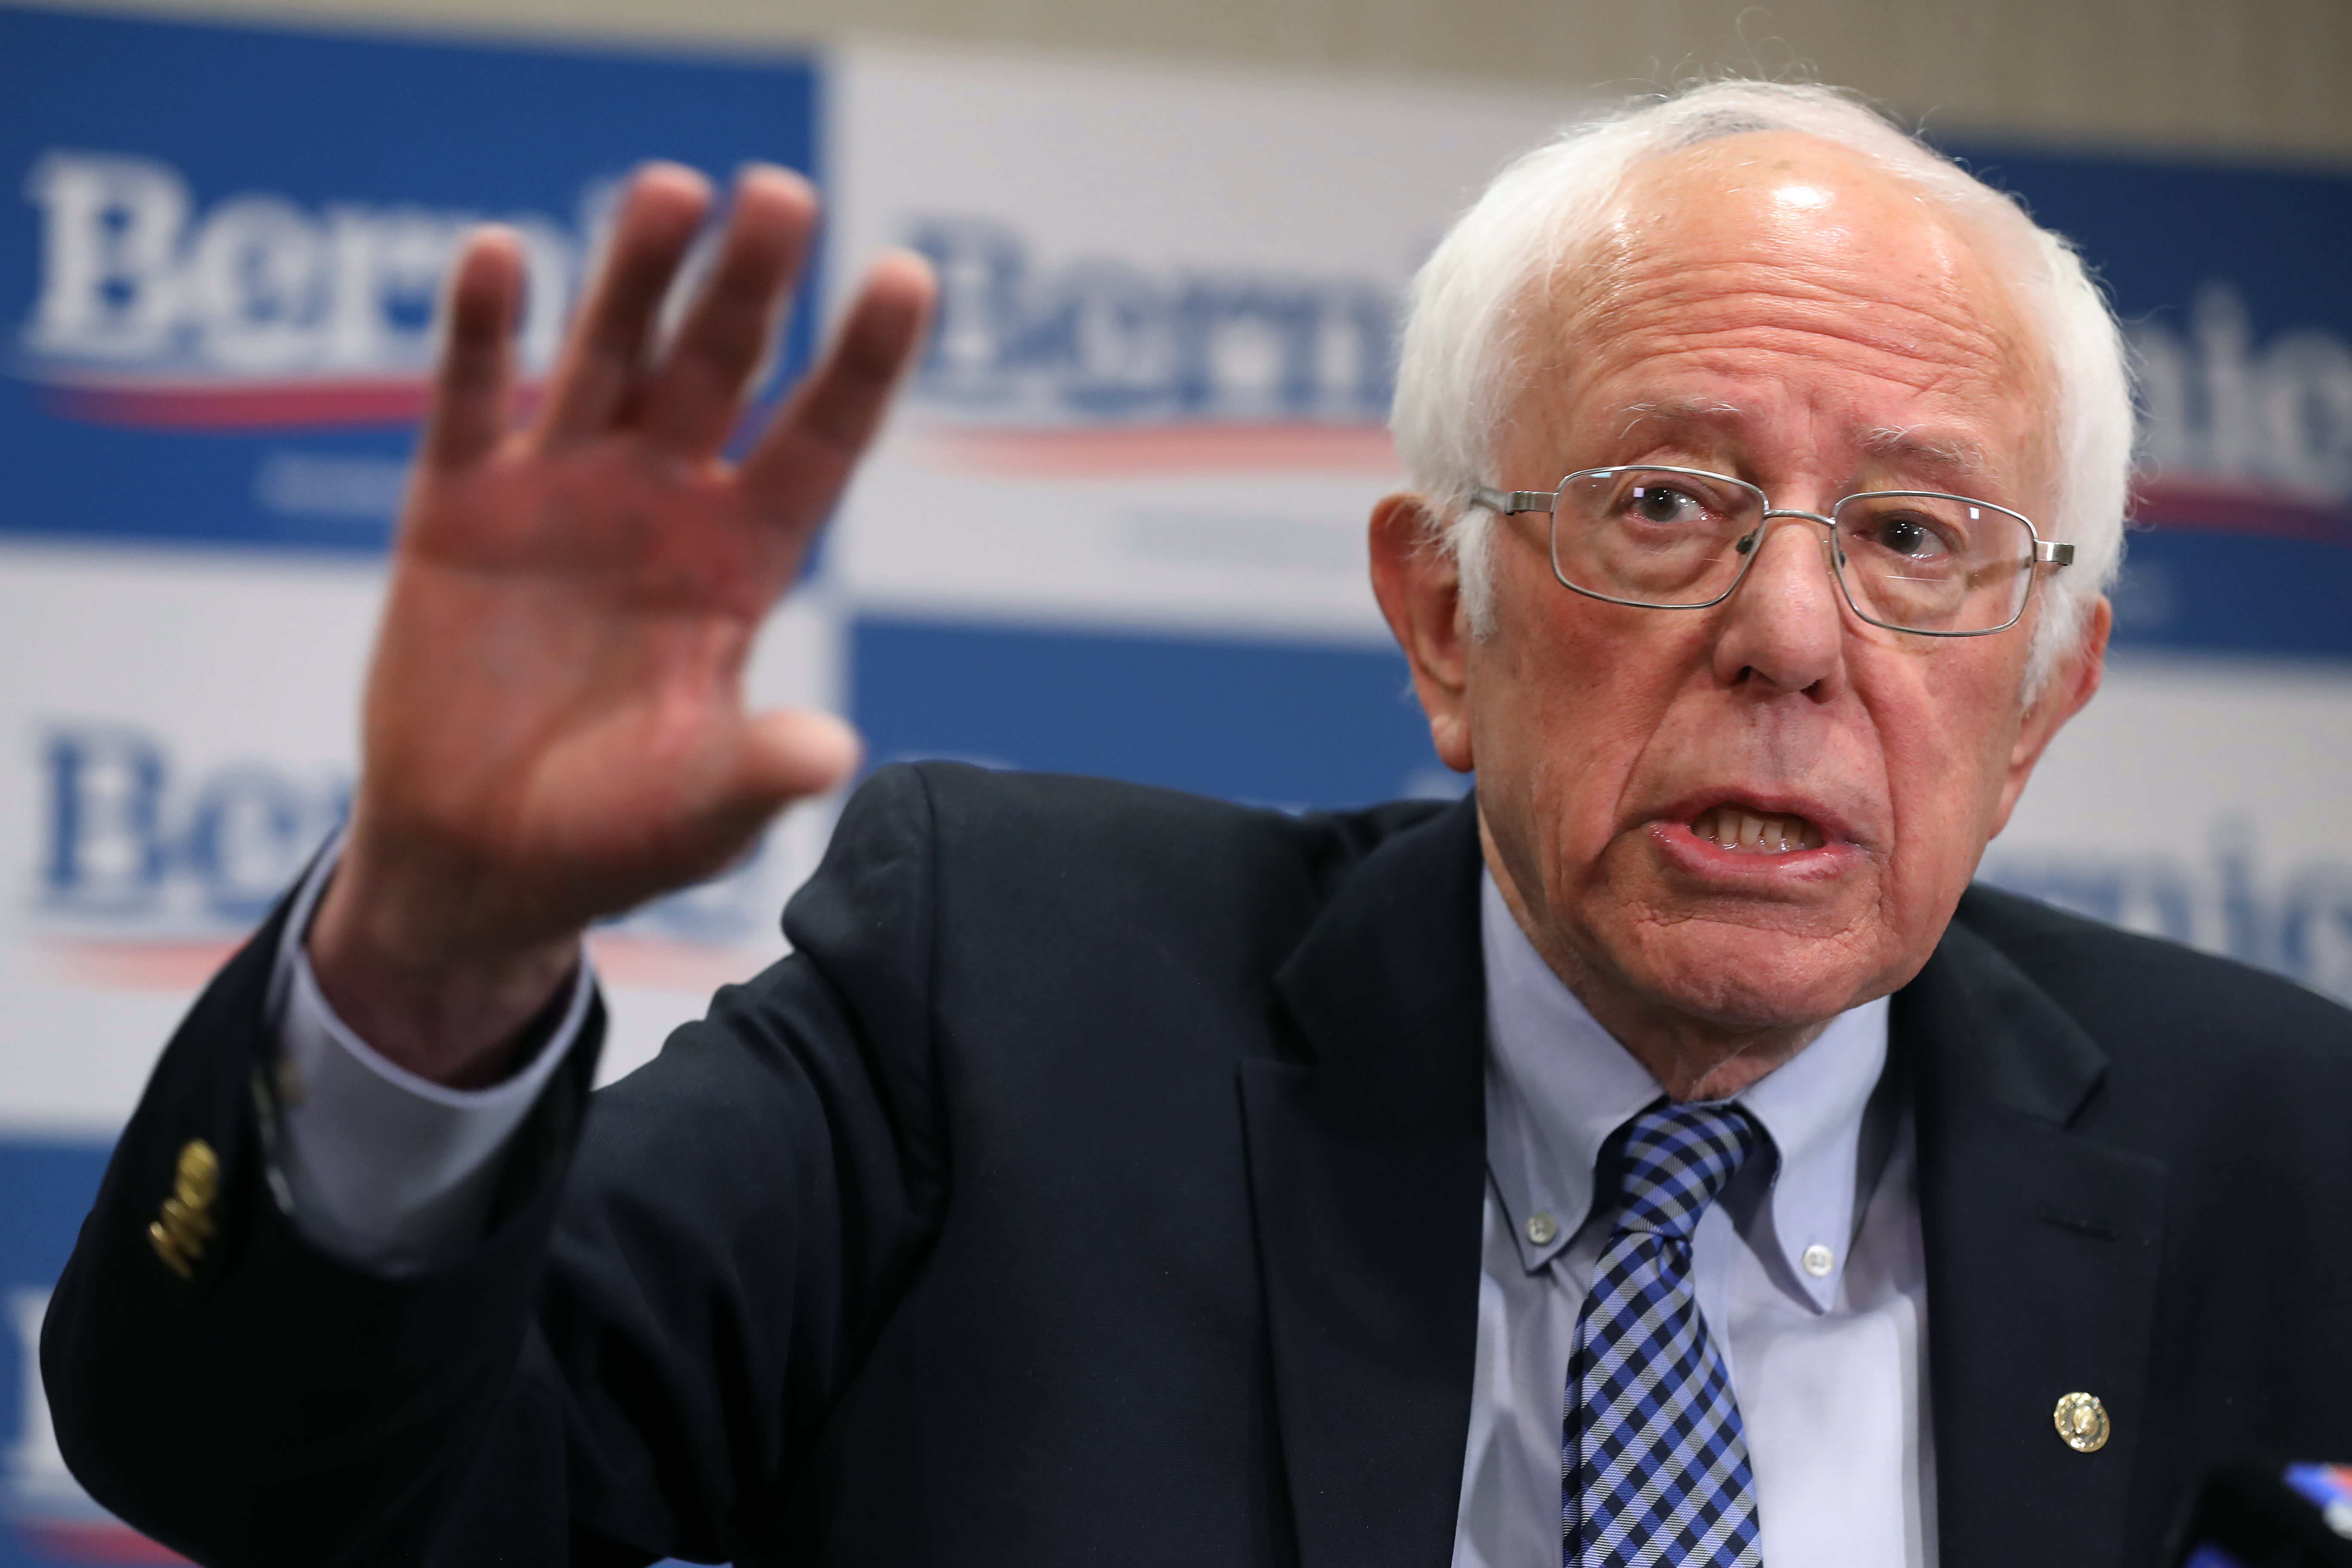 Amazon criticizes Bernie Sanders as he heads to Alabama to support the union campaign